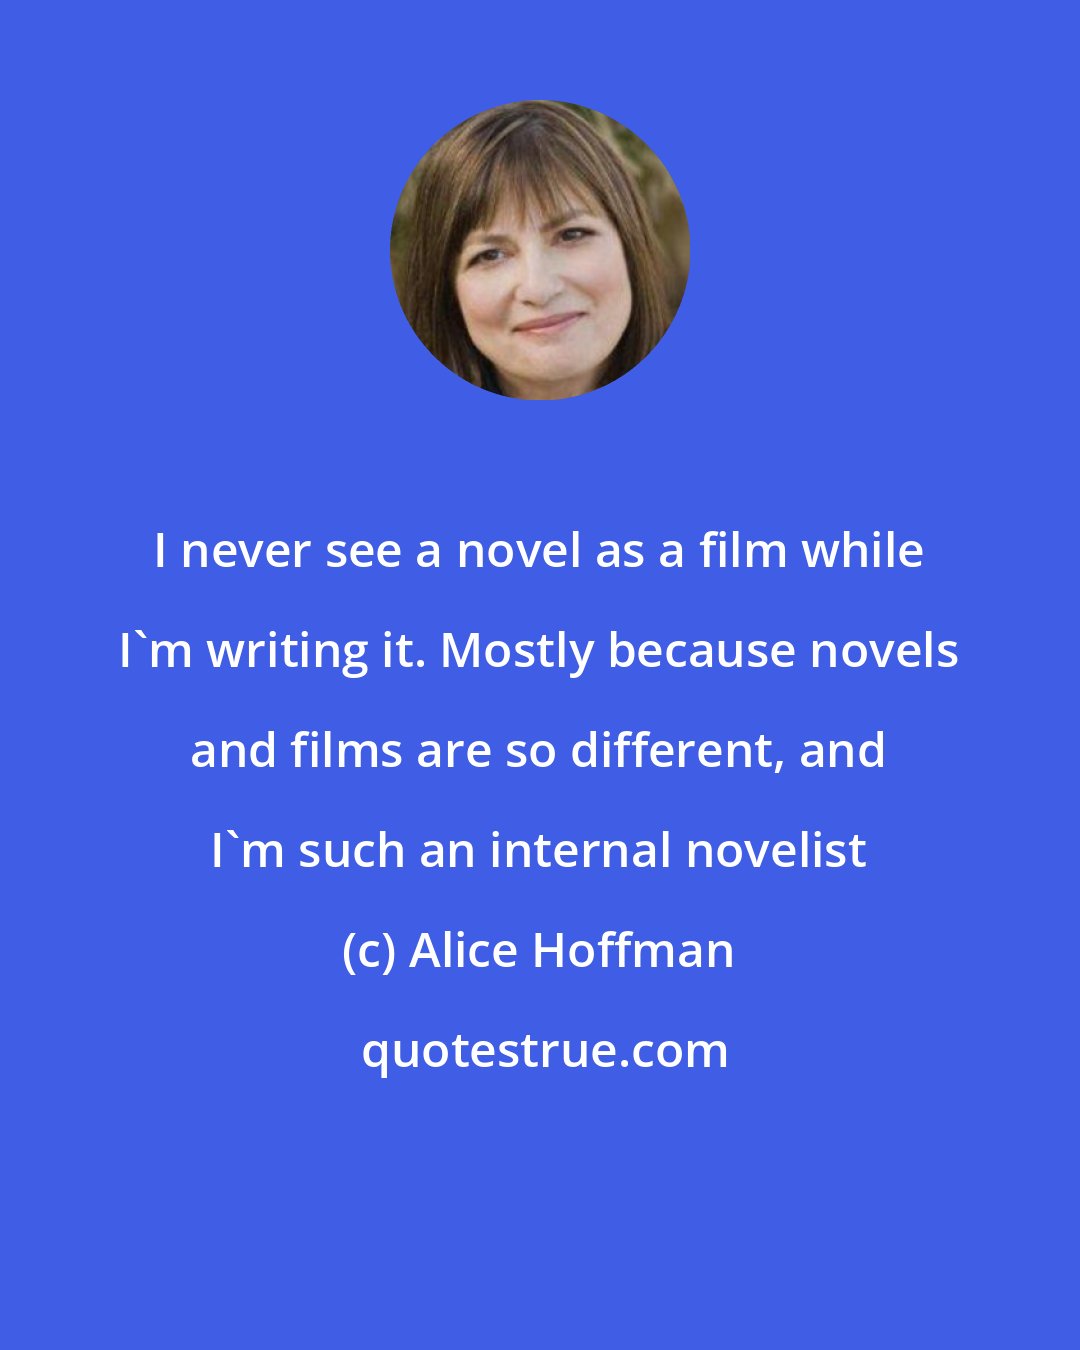 Alice Hoffman: I never see a novel as a film while I'm writing it. Mostly because novels and films are so different, and I'm such an internal novelist